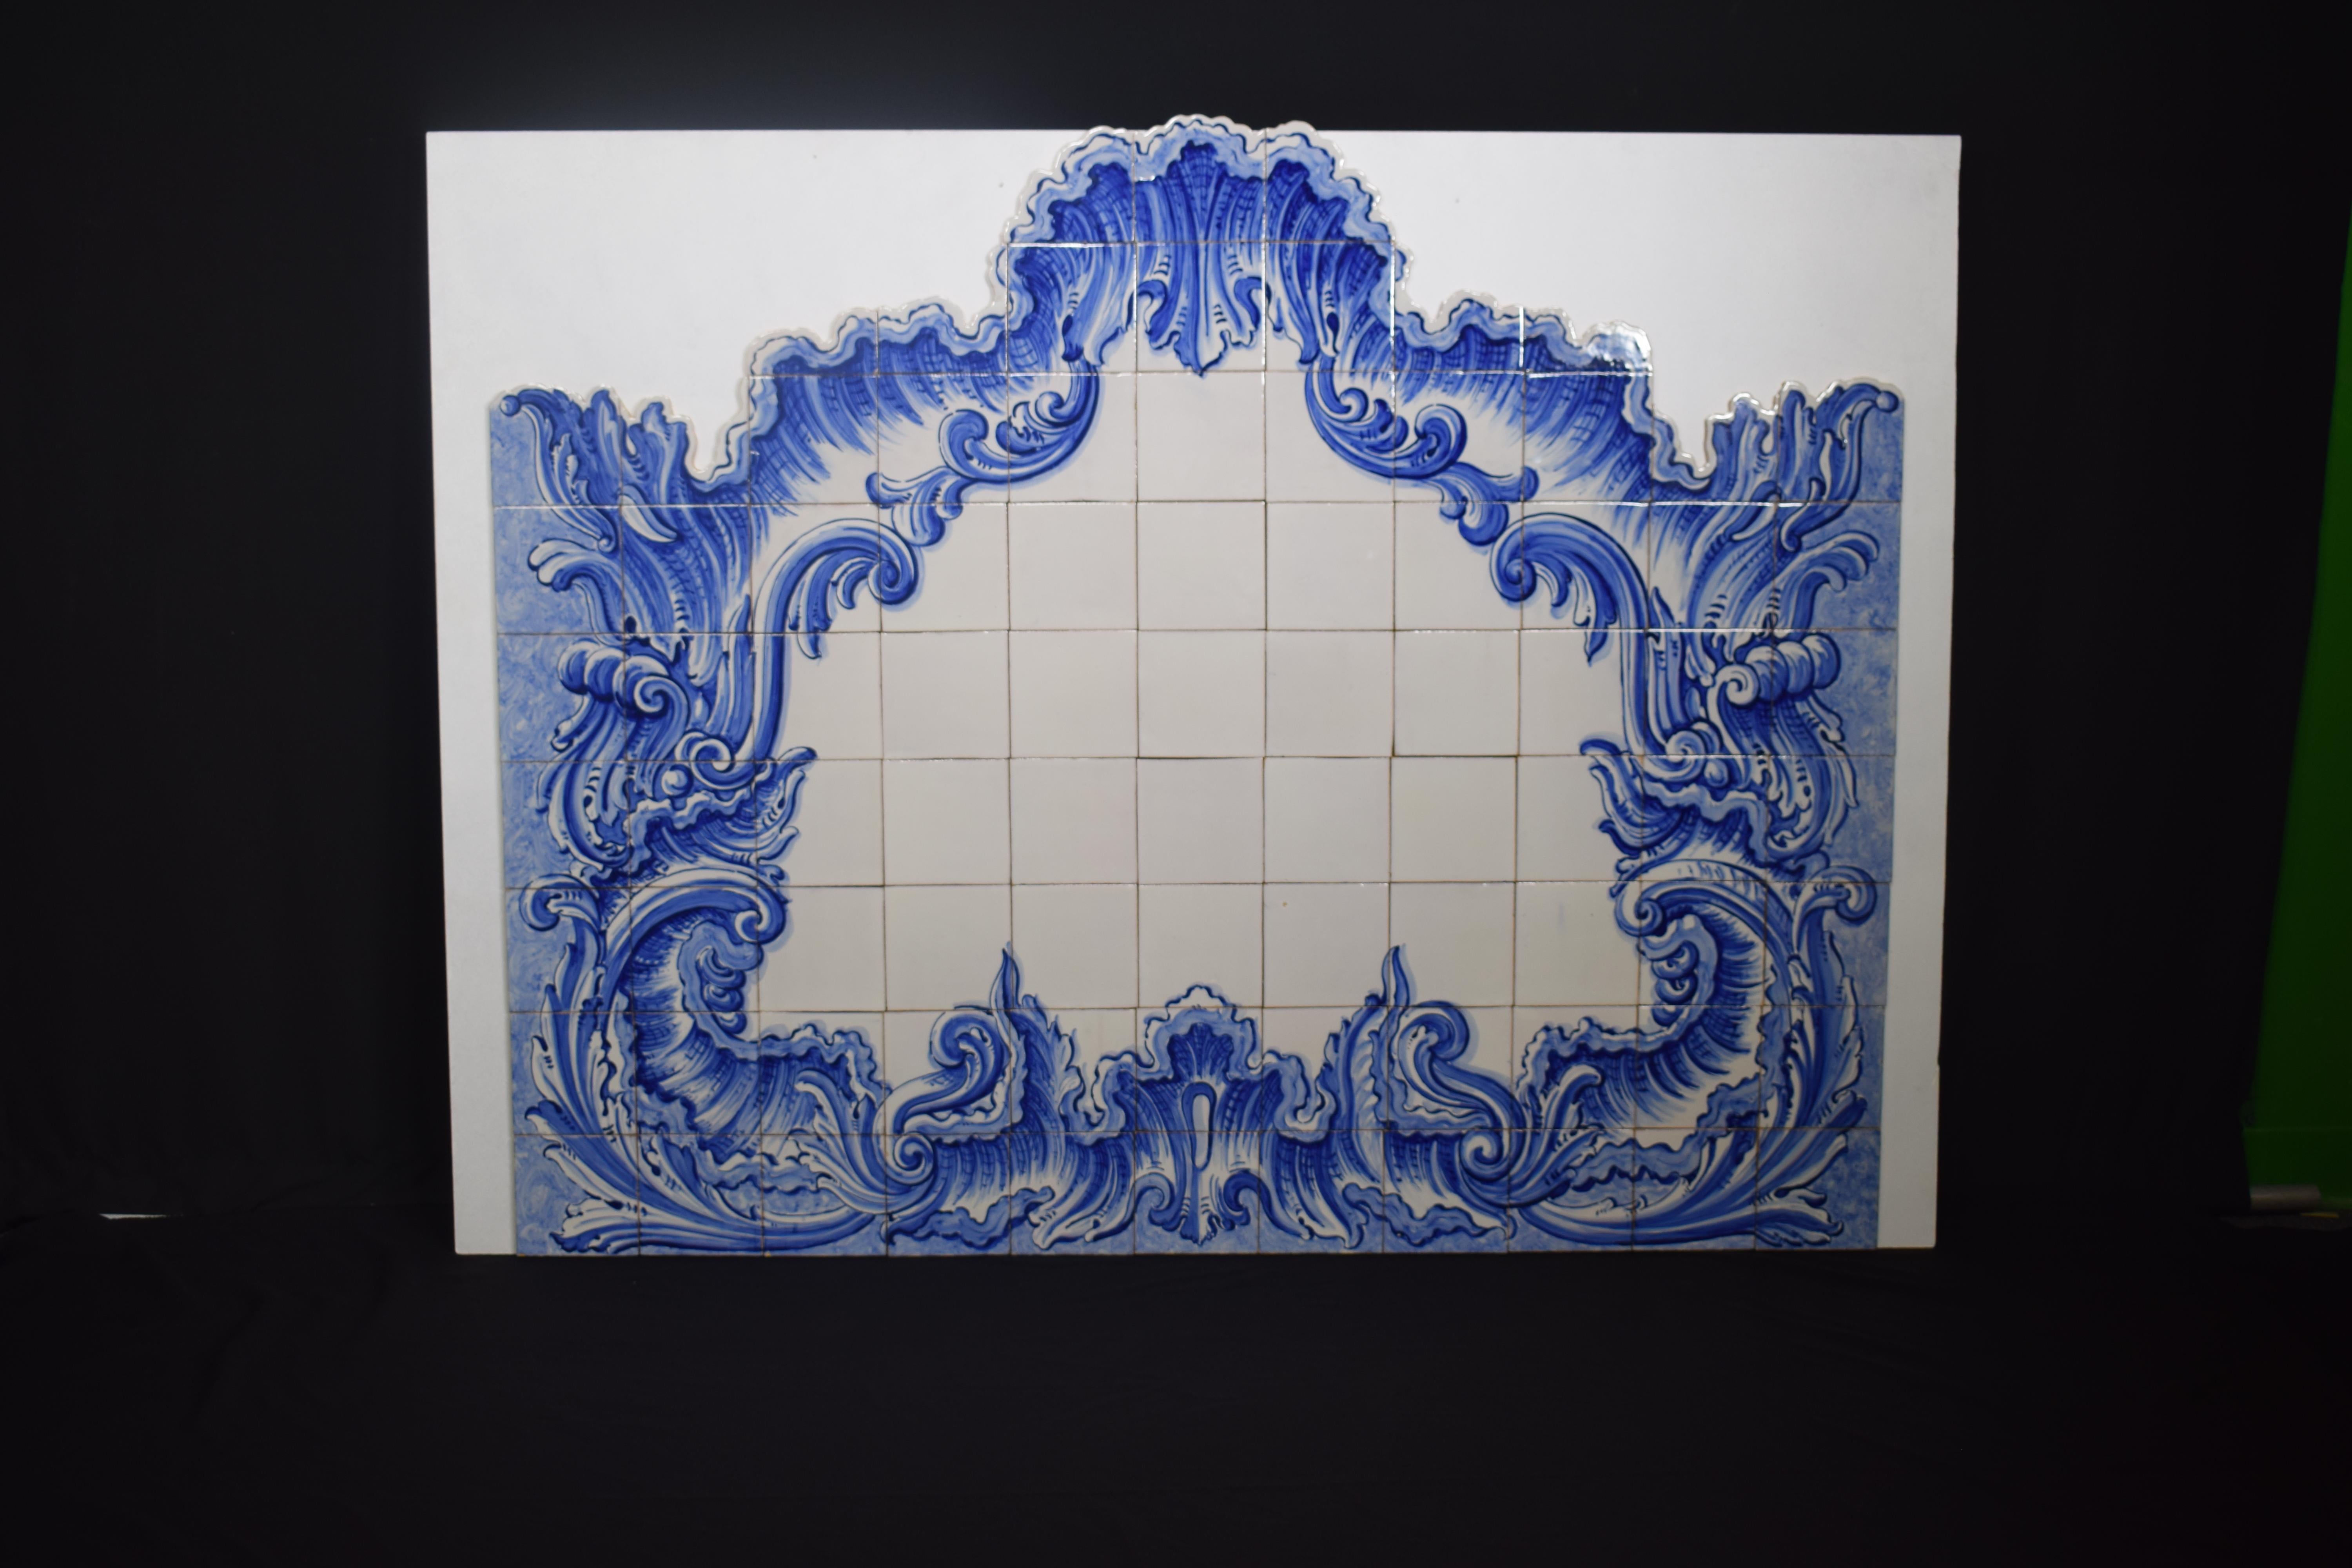 A blue & white tile wall ornament, exquisite detail.
Dimensions: Height 49 1/2